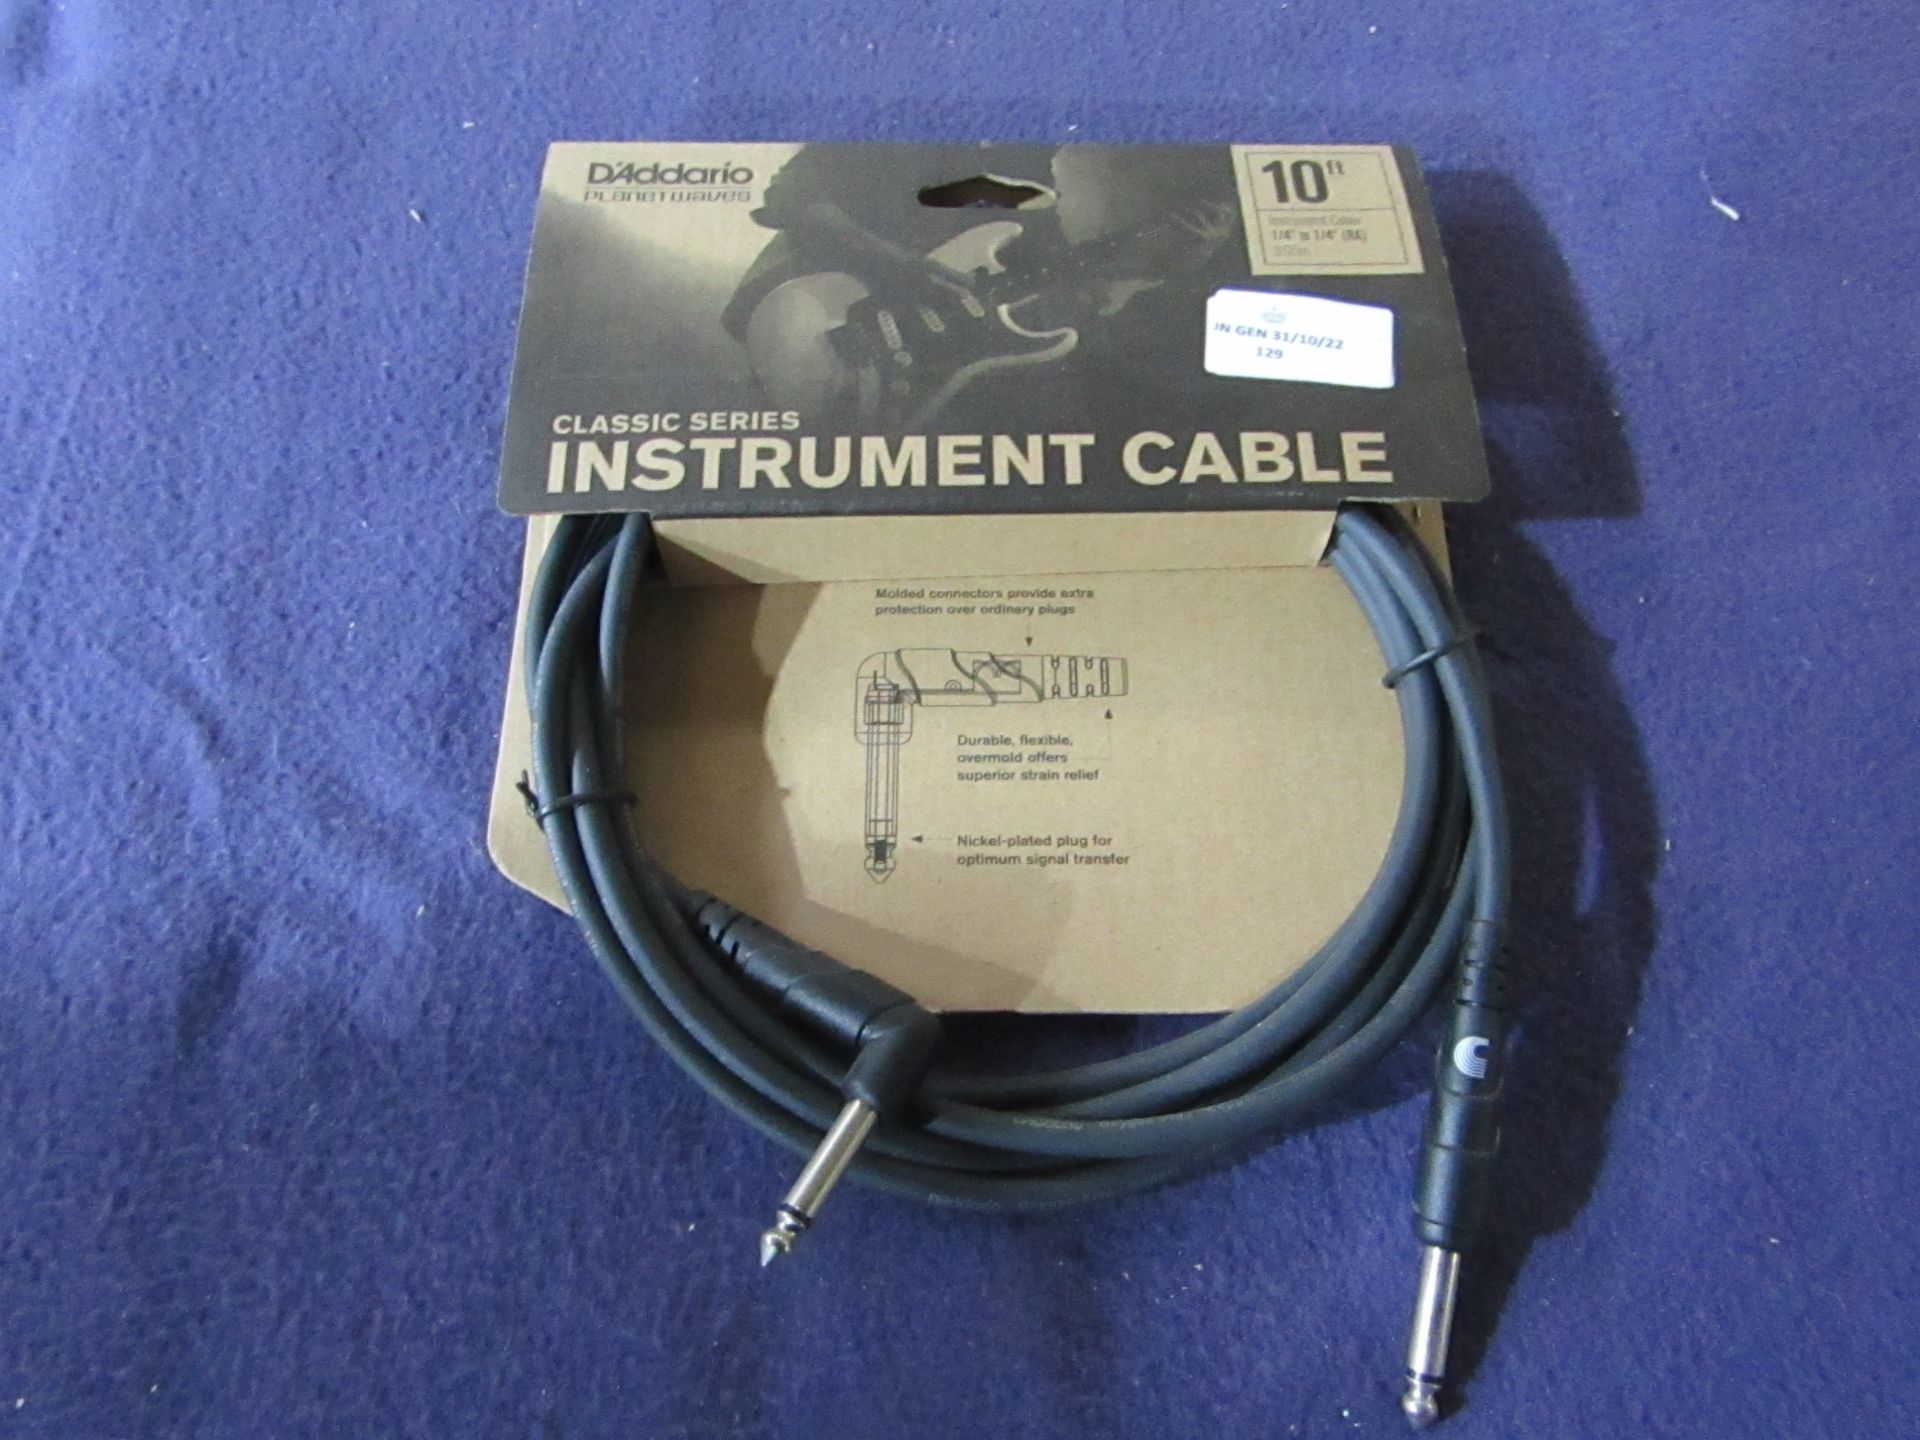 D'Addario - Classic Series Instrument Cable ( 10ft ) - New & Packaged.